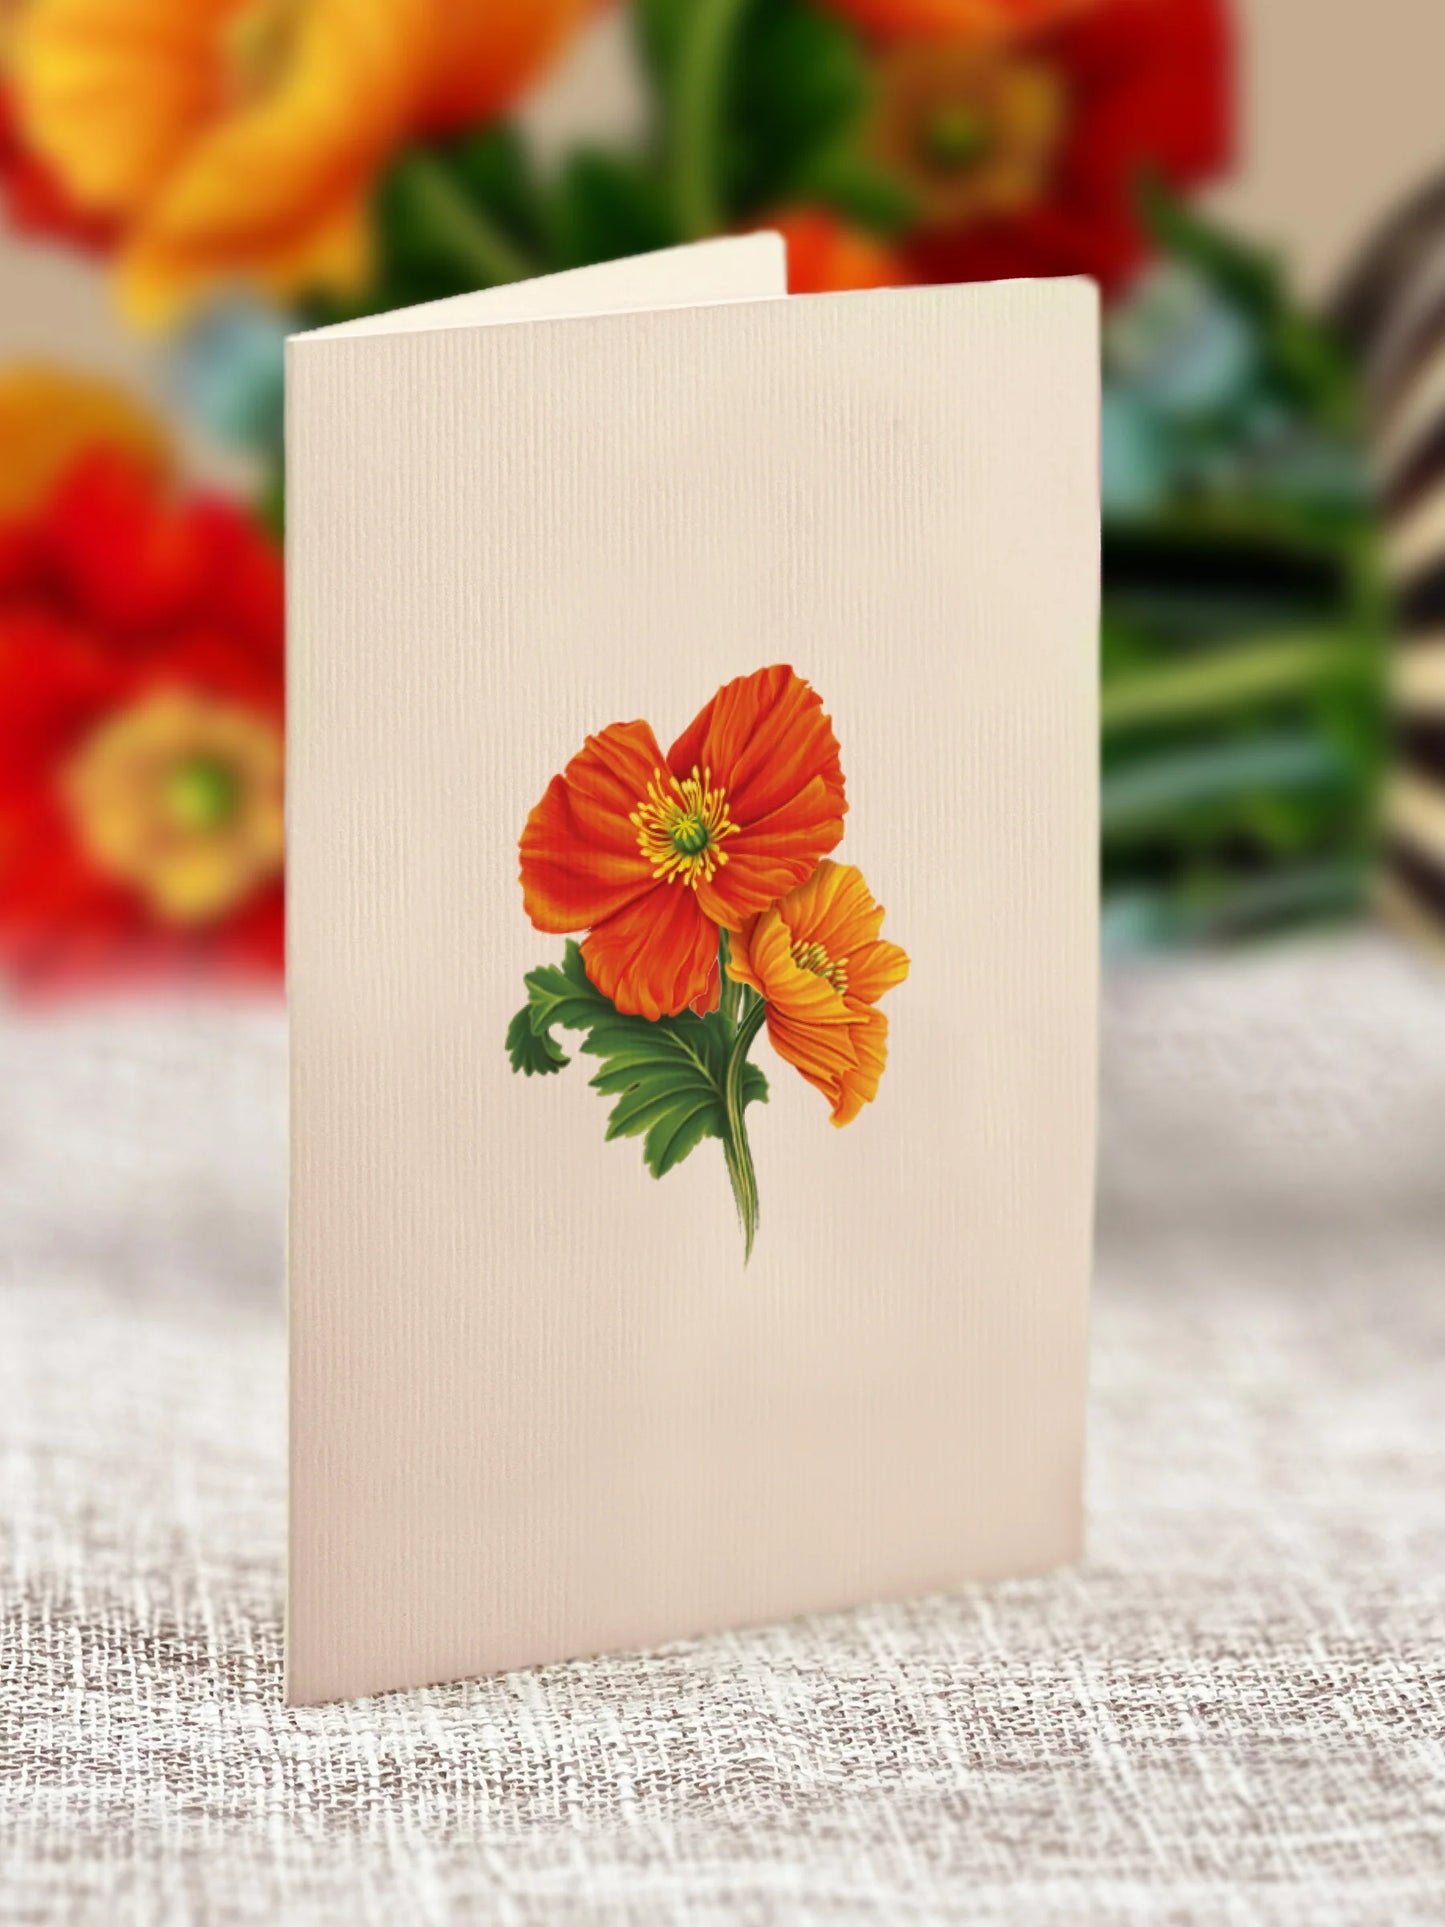 close-up of enclosure card with poppies printed on it.